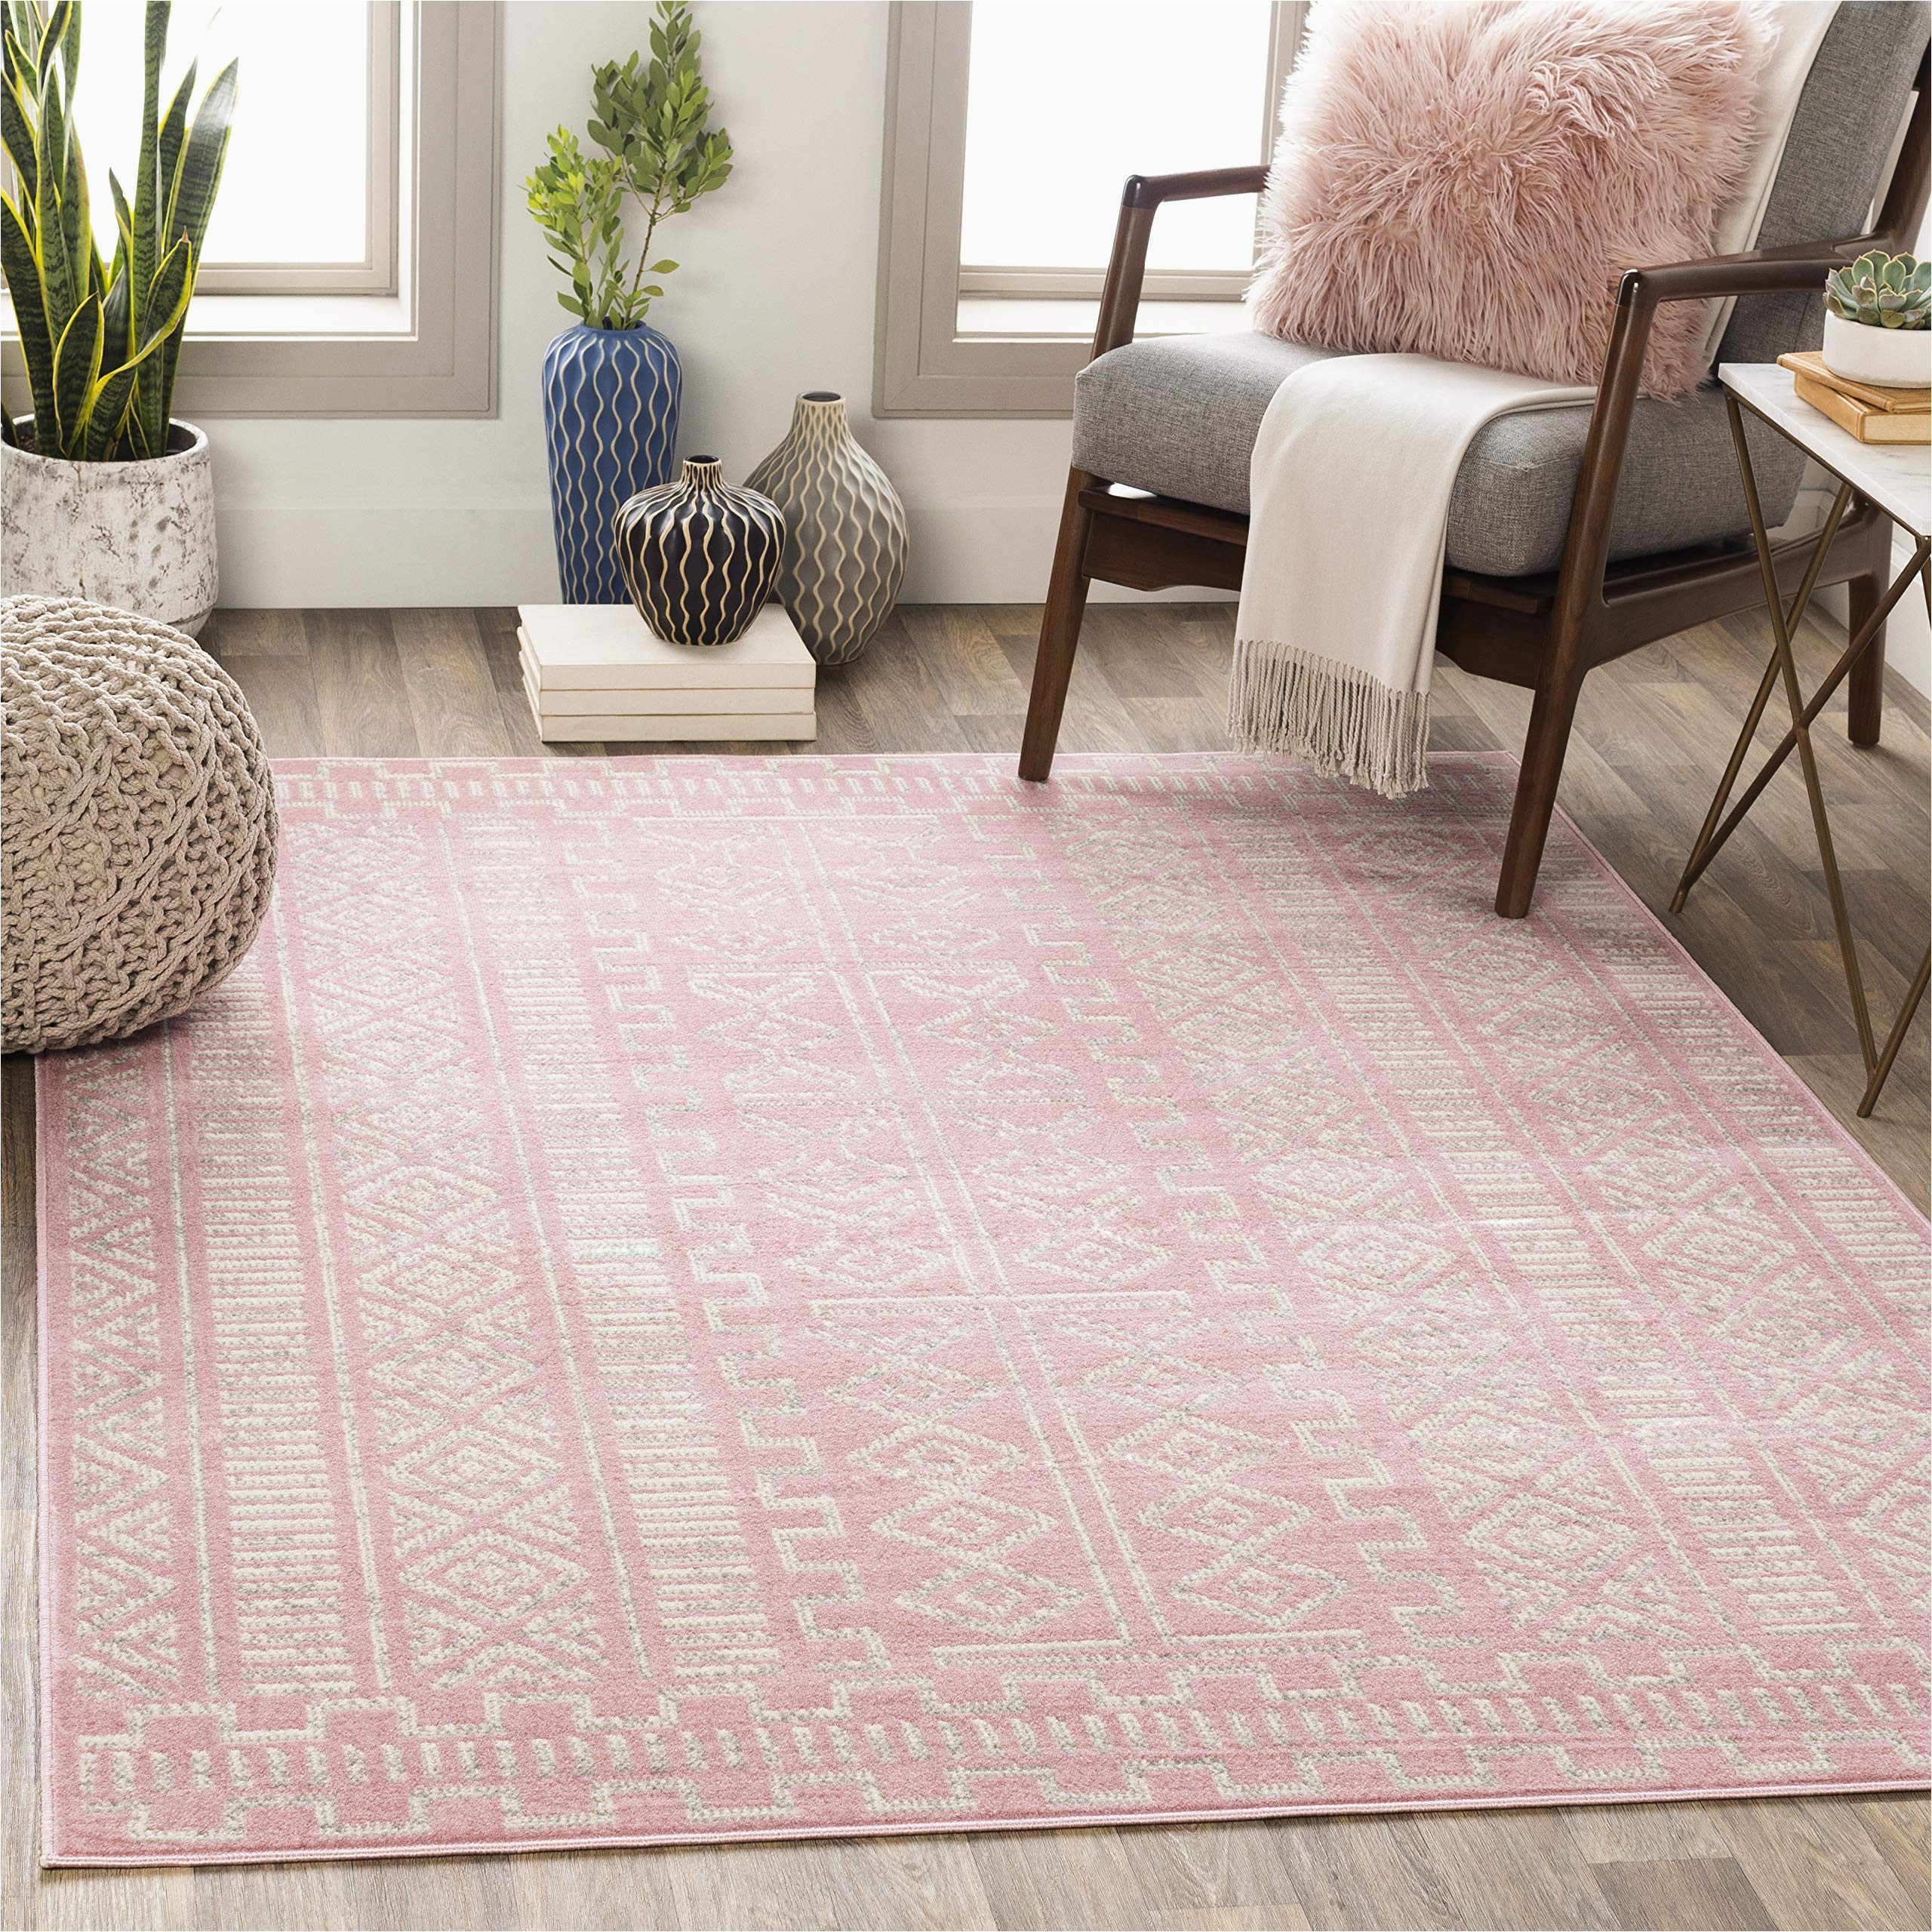 Area Rugs with Pink In them Amazon.com: Artistic Weavers Dianne area Rug 5’3″ X 7’3″, Pale …